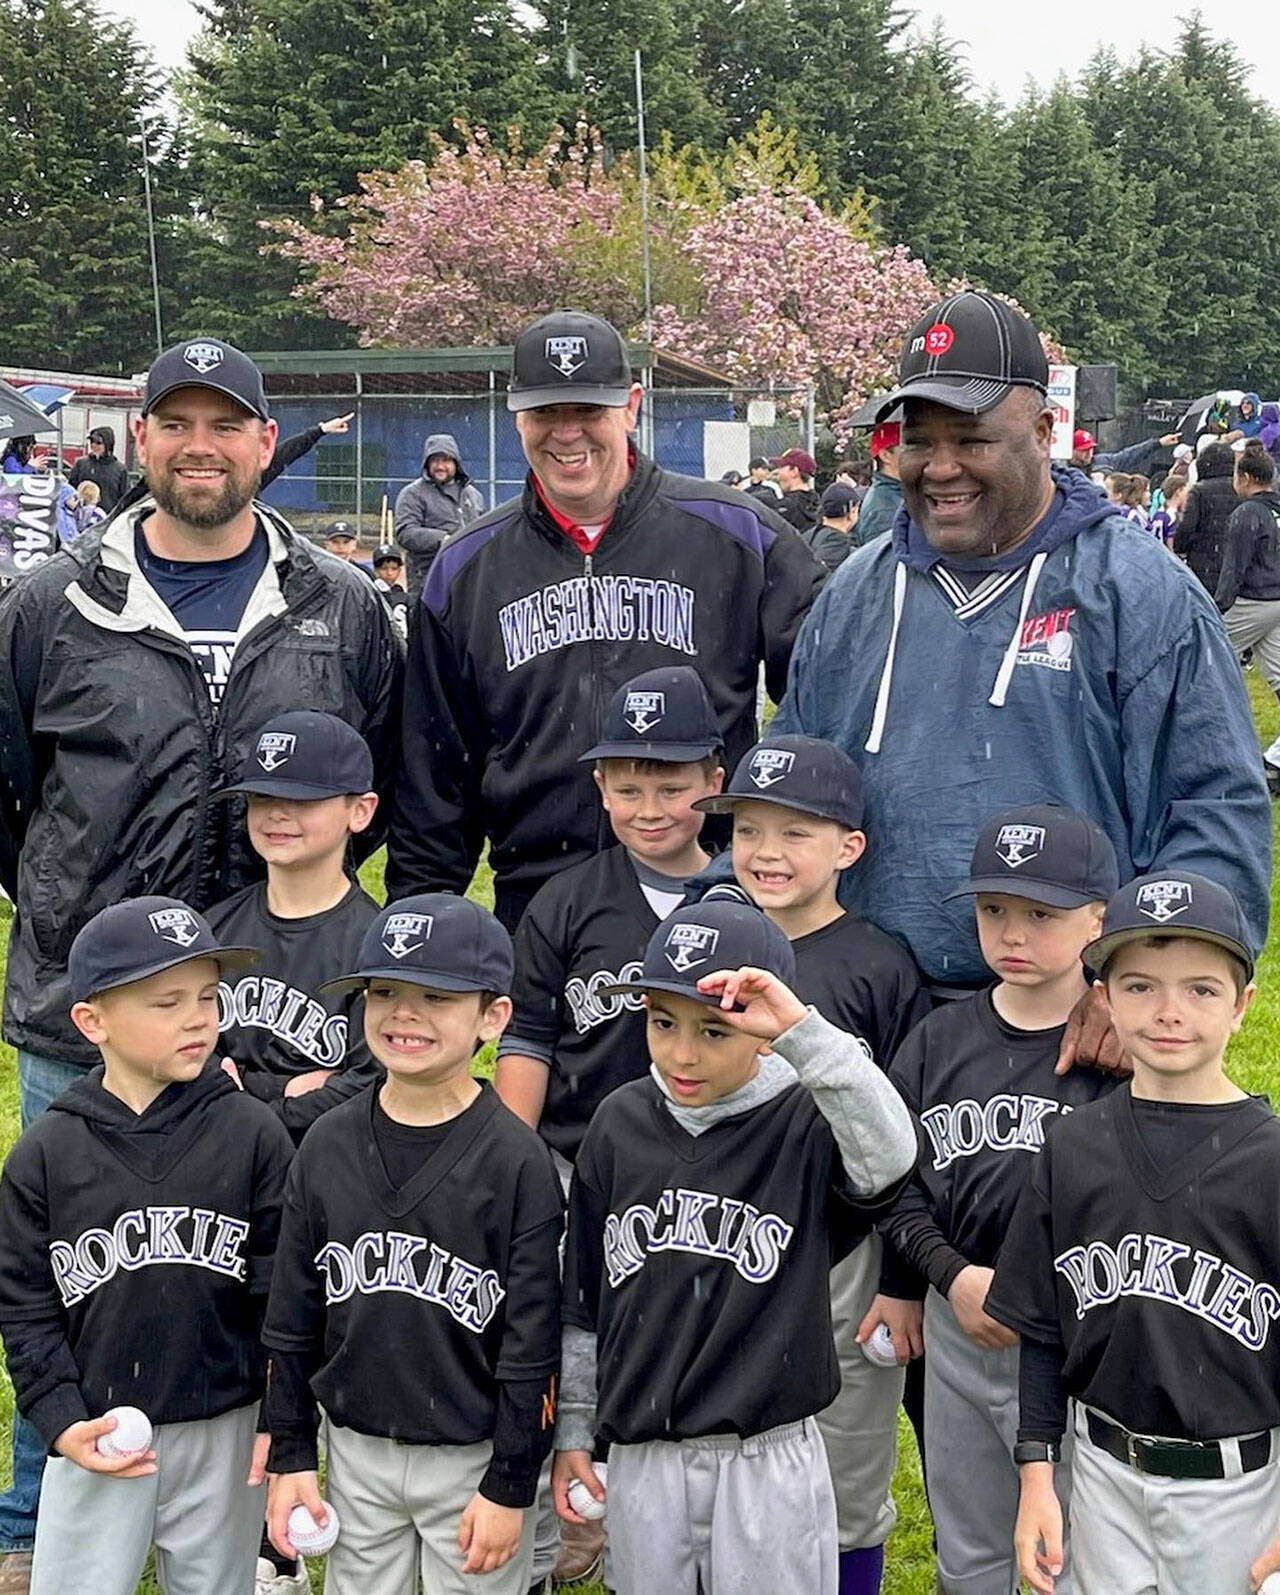 Kent City Council President Bill Boyce, far right, joins the Rockies coaches and players during Kent Little League Day April 30. COURTESY PHOTO, Puget Sound Fire